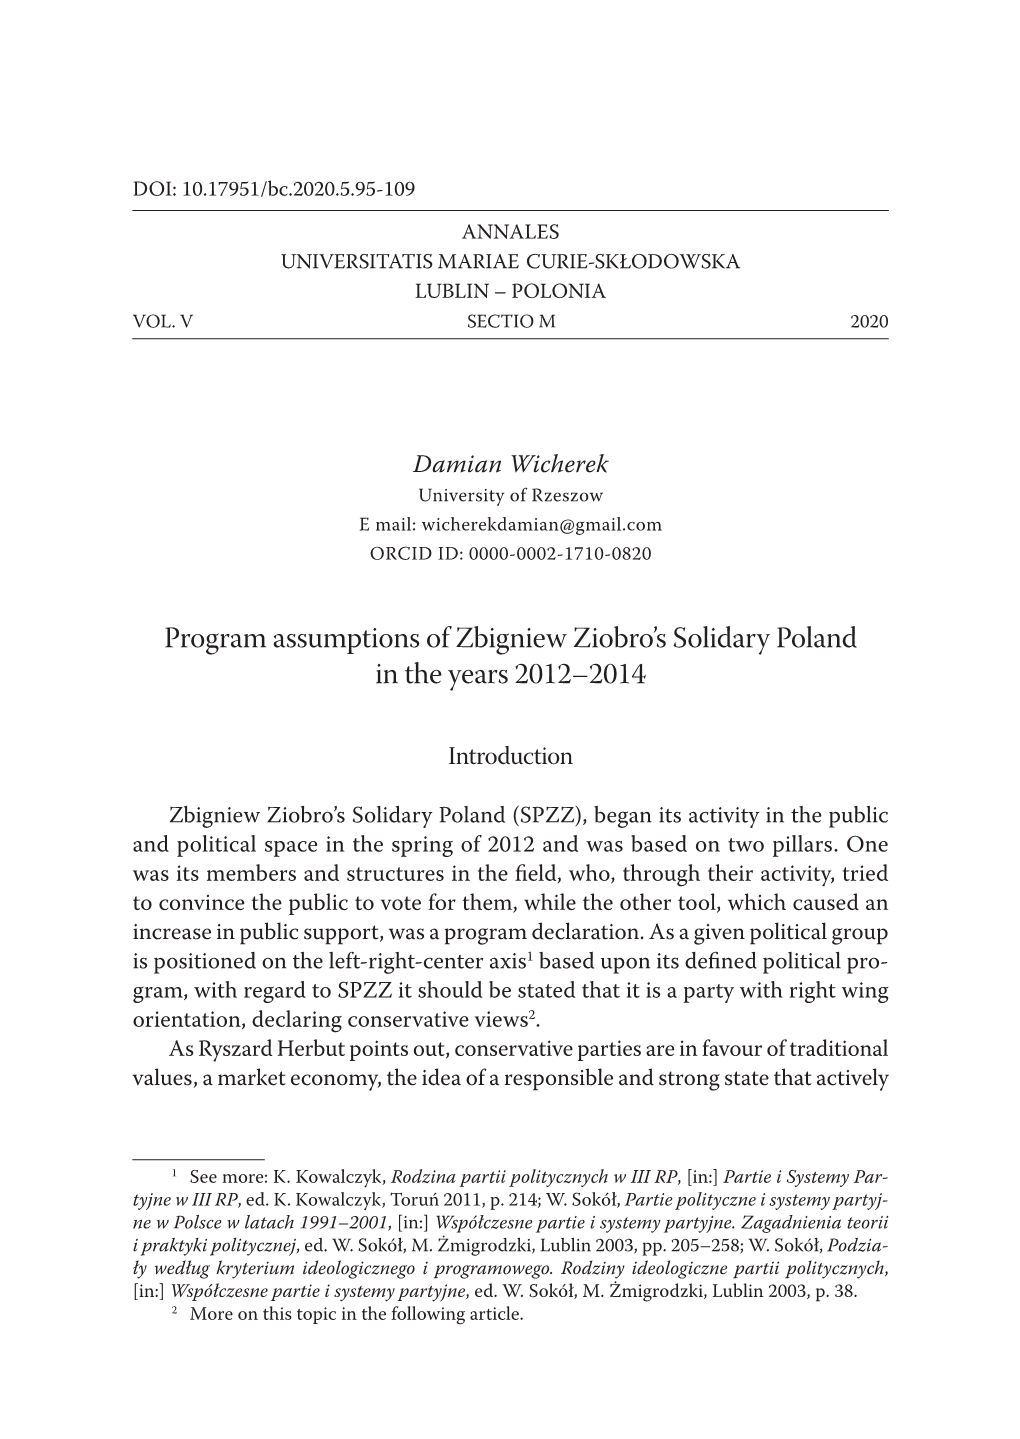 Program Assumptions of Zbigniew Ziobro's Solidary Poland in the Years 2012–2014